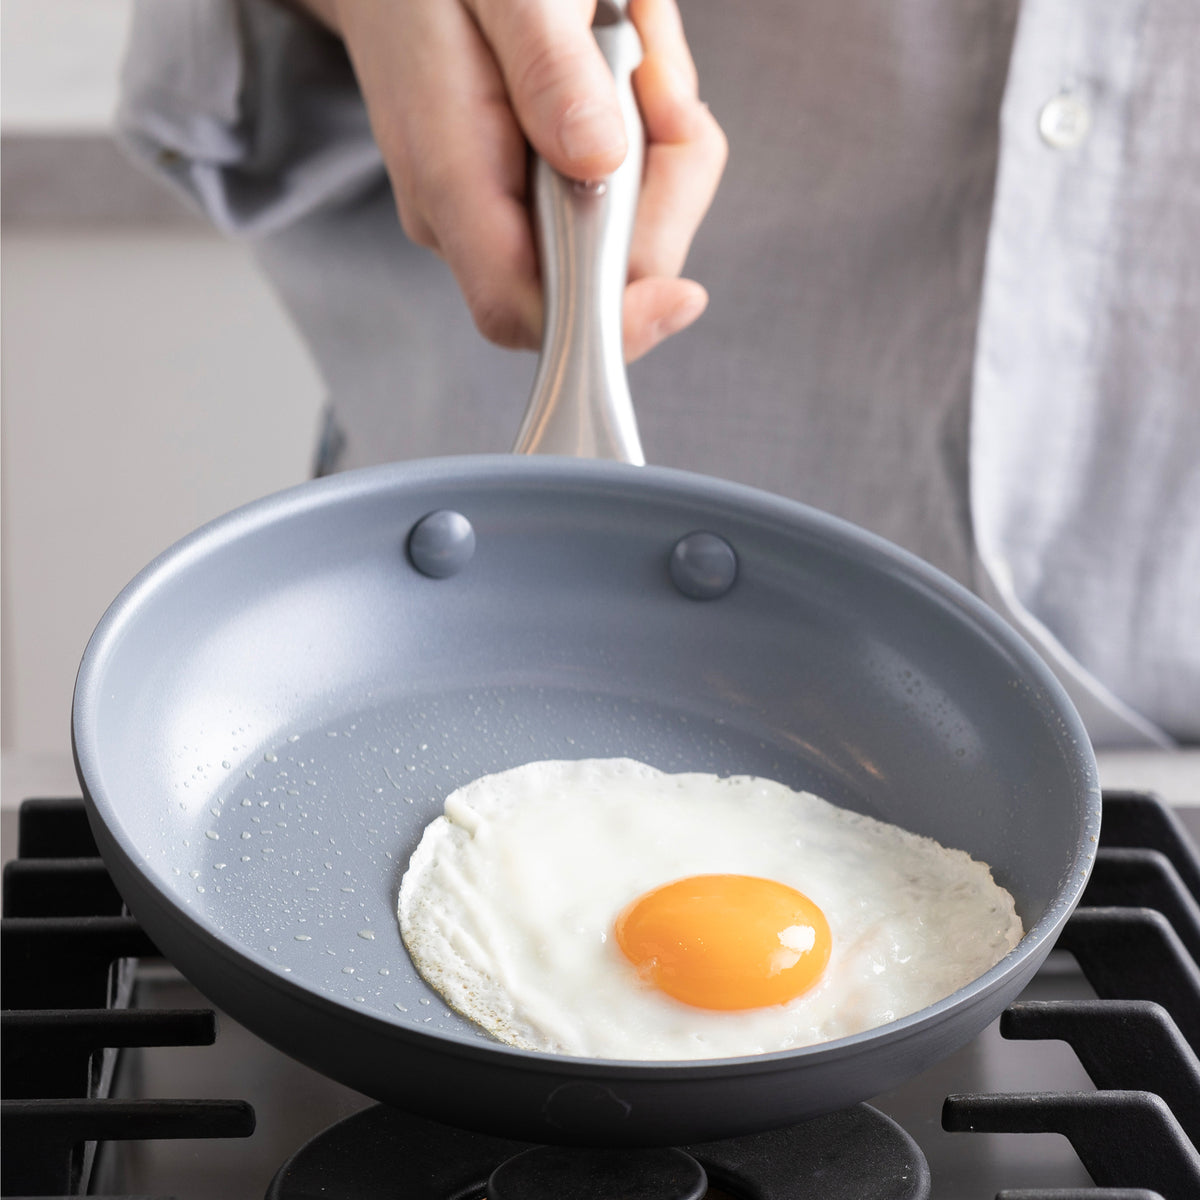 Egg Frying Pan, Nonstick Fried Egg Pan 3 Section Square Grill Pan